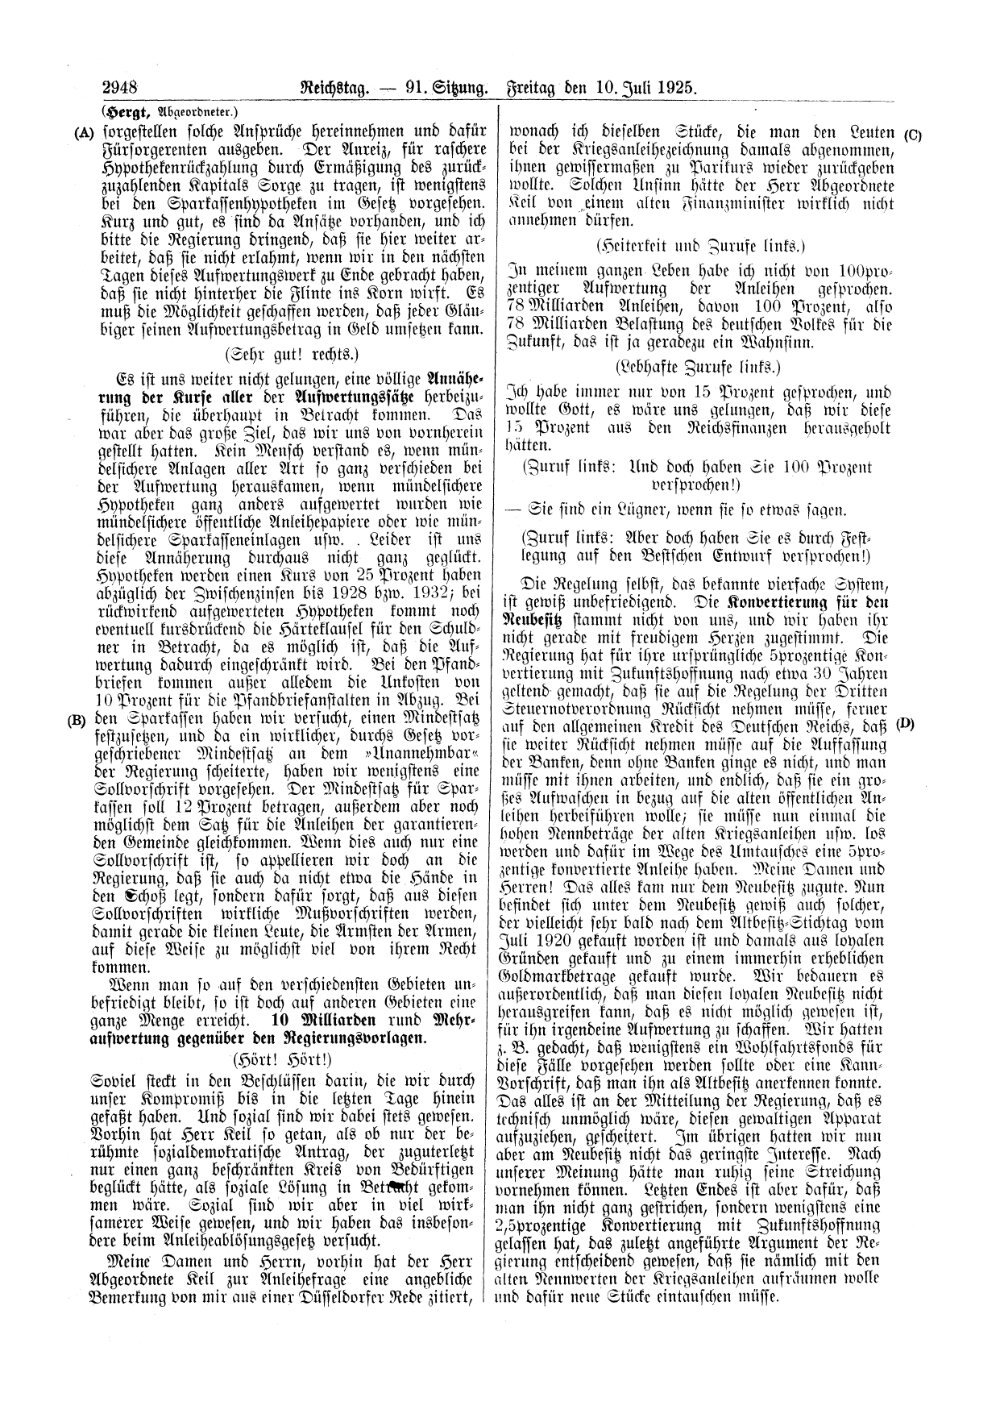 Scan of page 2948